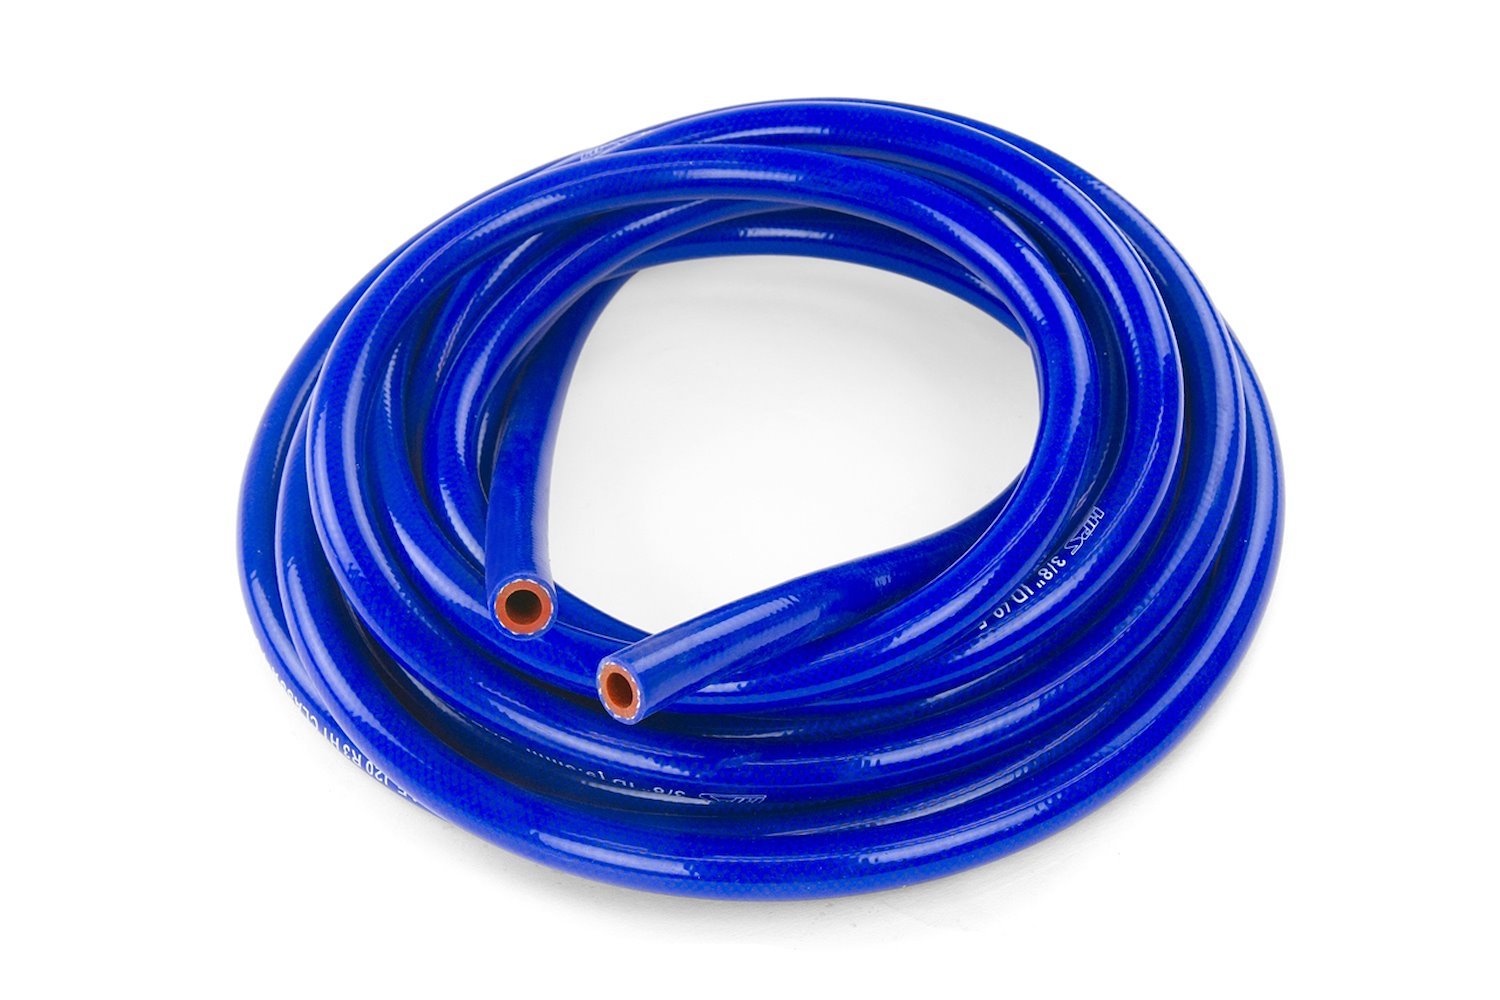 HTHH-100-BLUEx25 Silicone Heater Hose Tubing, High-Temp 1-Ply Reinforced, 1 in. ID, 25 ft. Roll, Blue